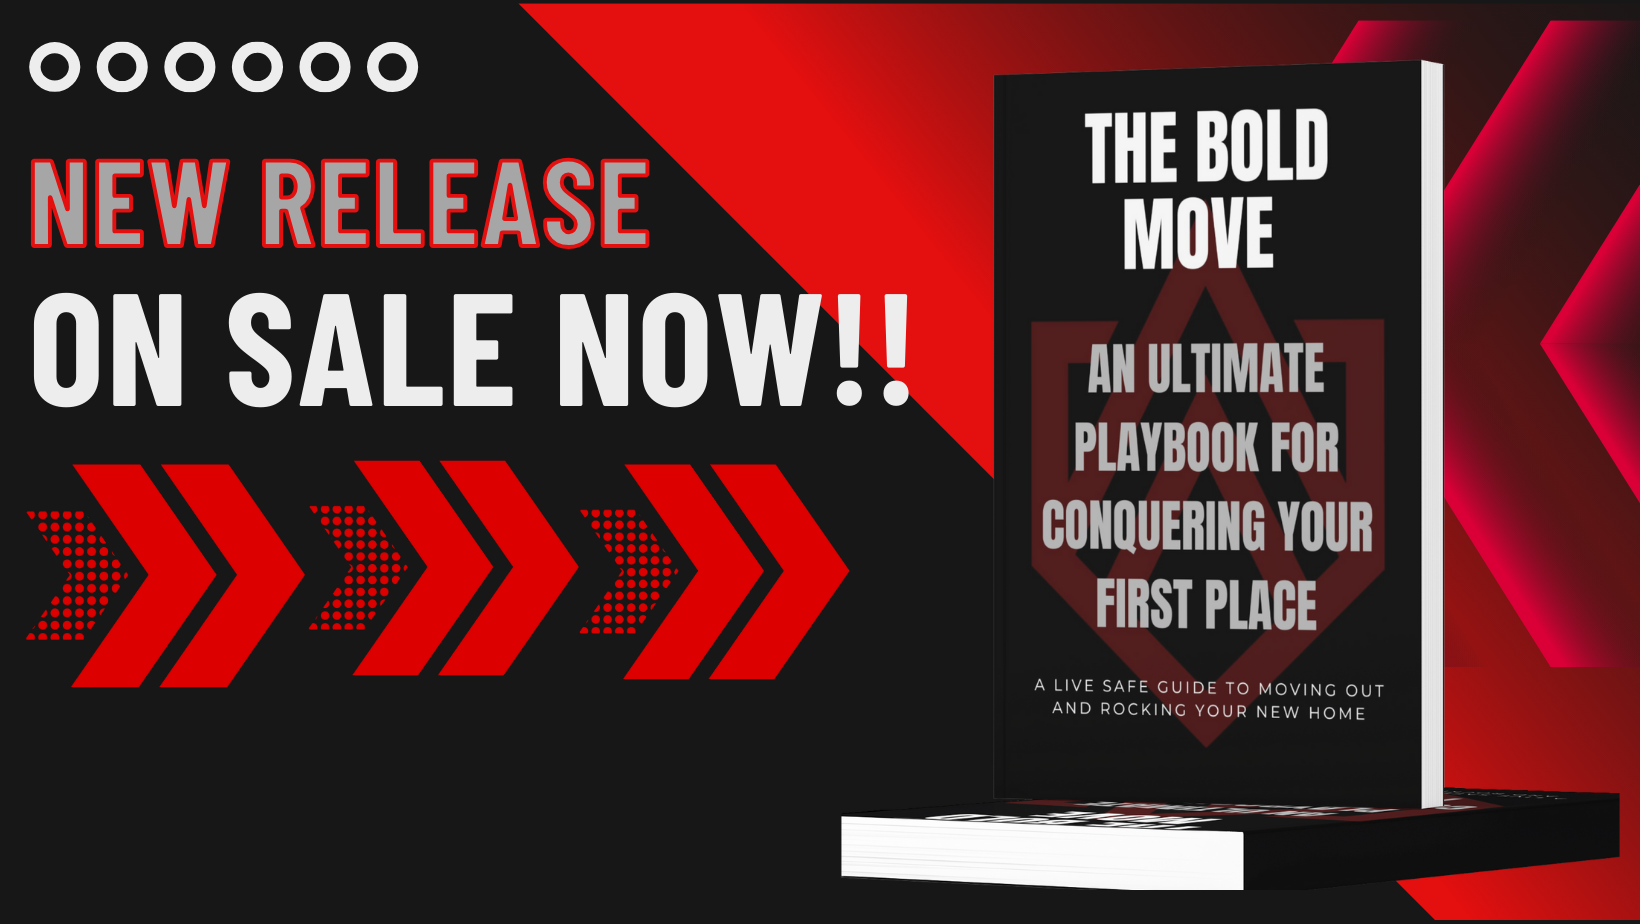 The Bold Move: An Ultimate Playbook for Conquering Your First Place.